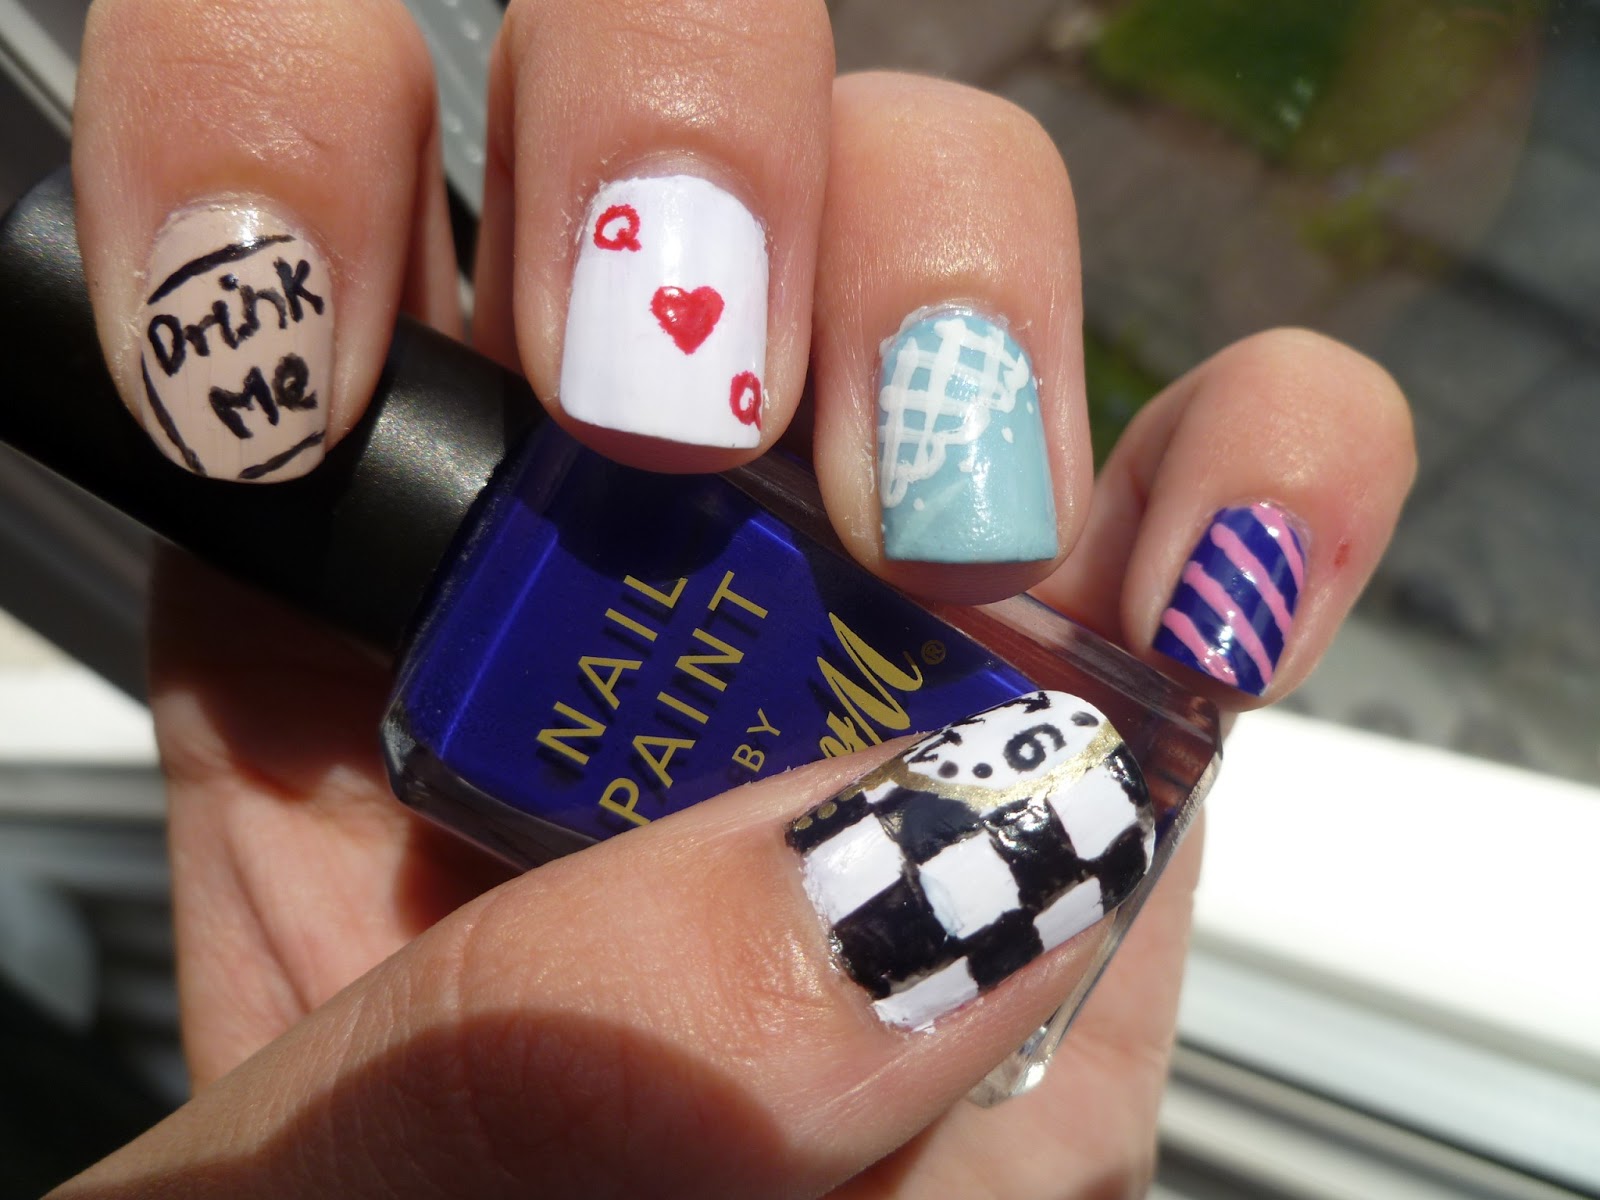 2. Mad Hatter inspired nail art - wide 7